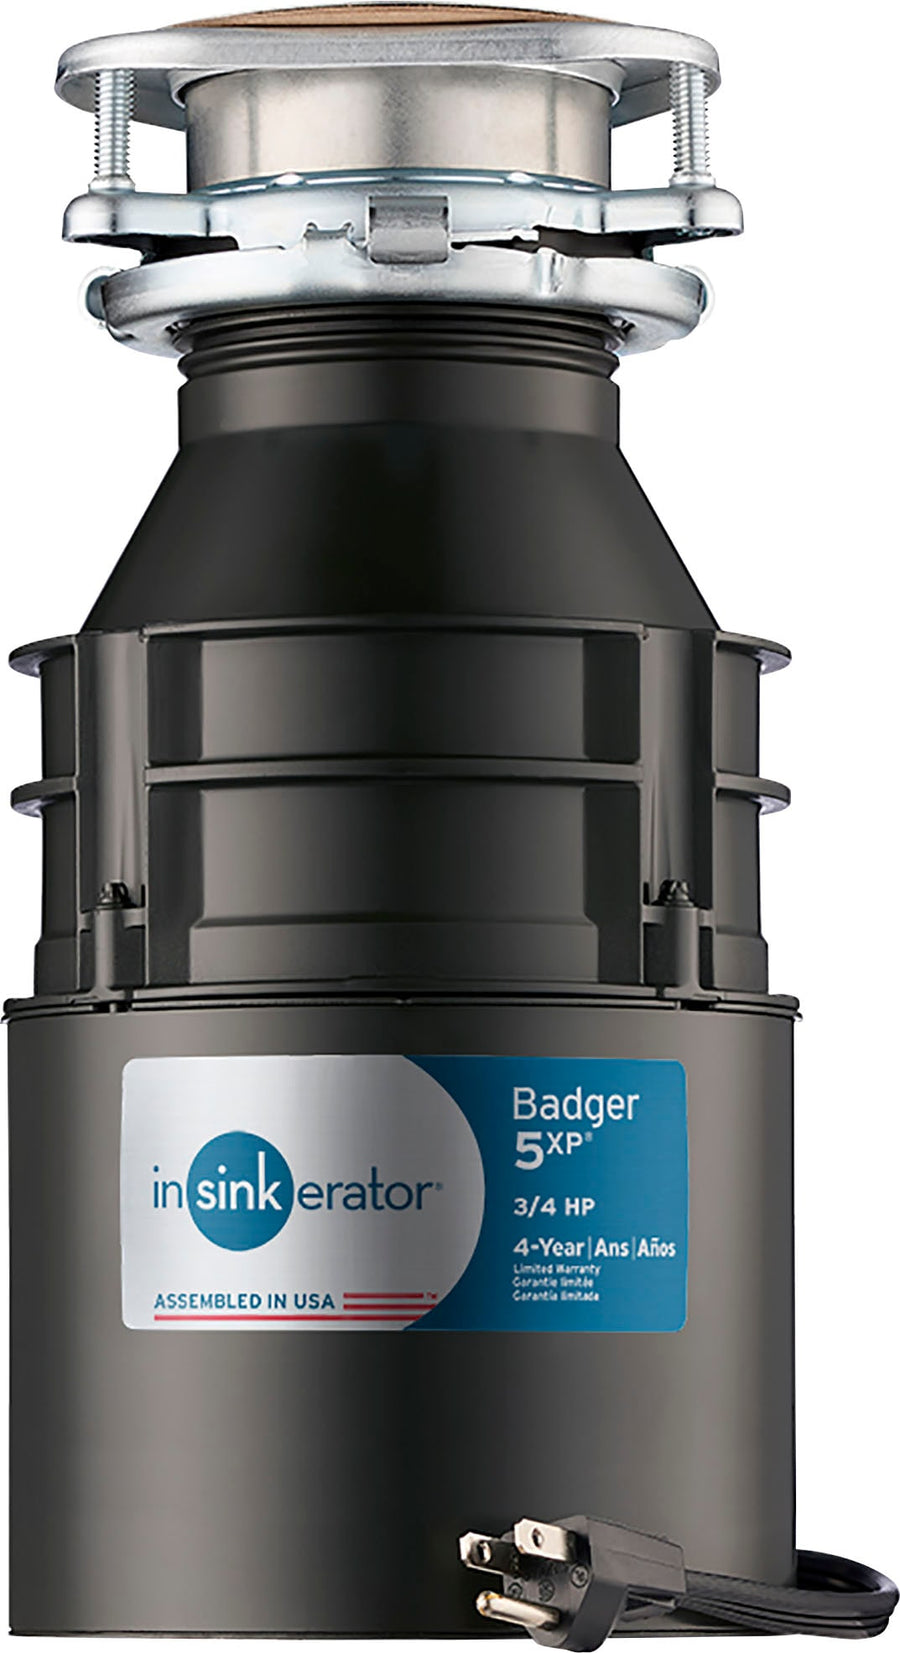 InSinkerator - Badger 5XP Lift and Latch Power Series 3/4 HP Continuous Feed Garbage Disposal with Power Cord - Black_0